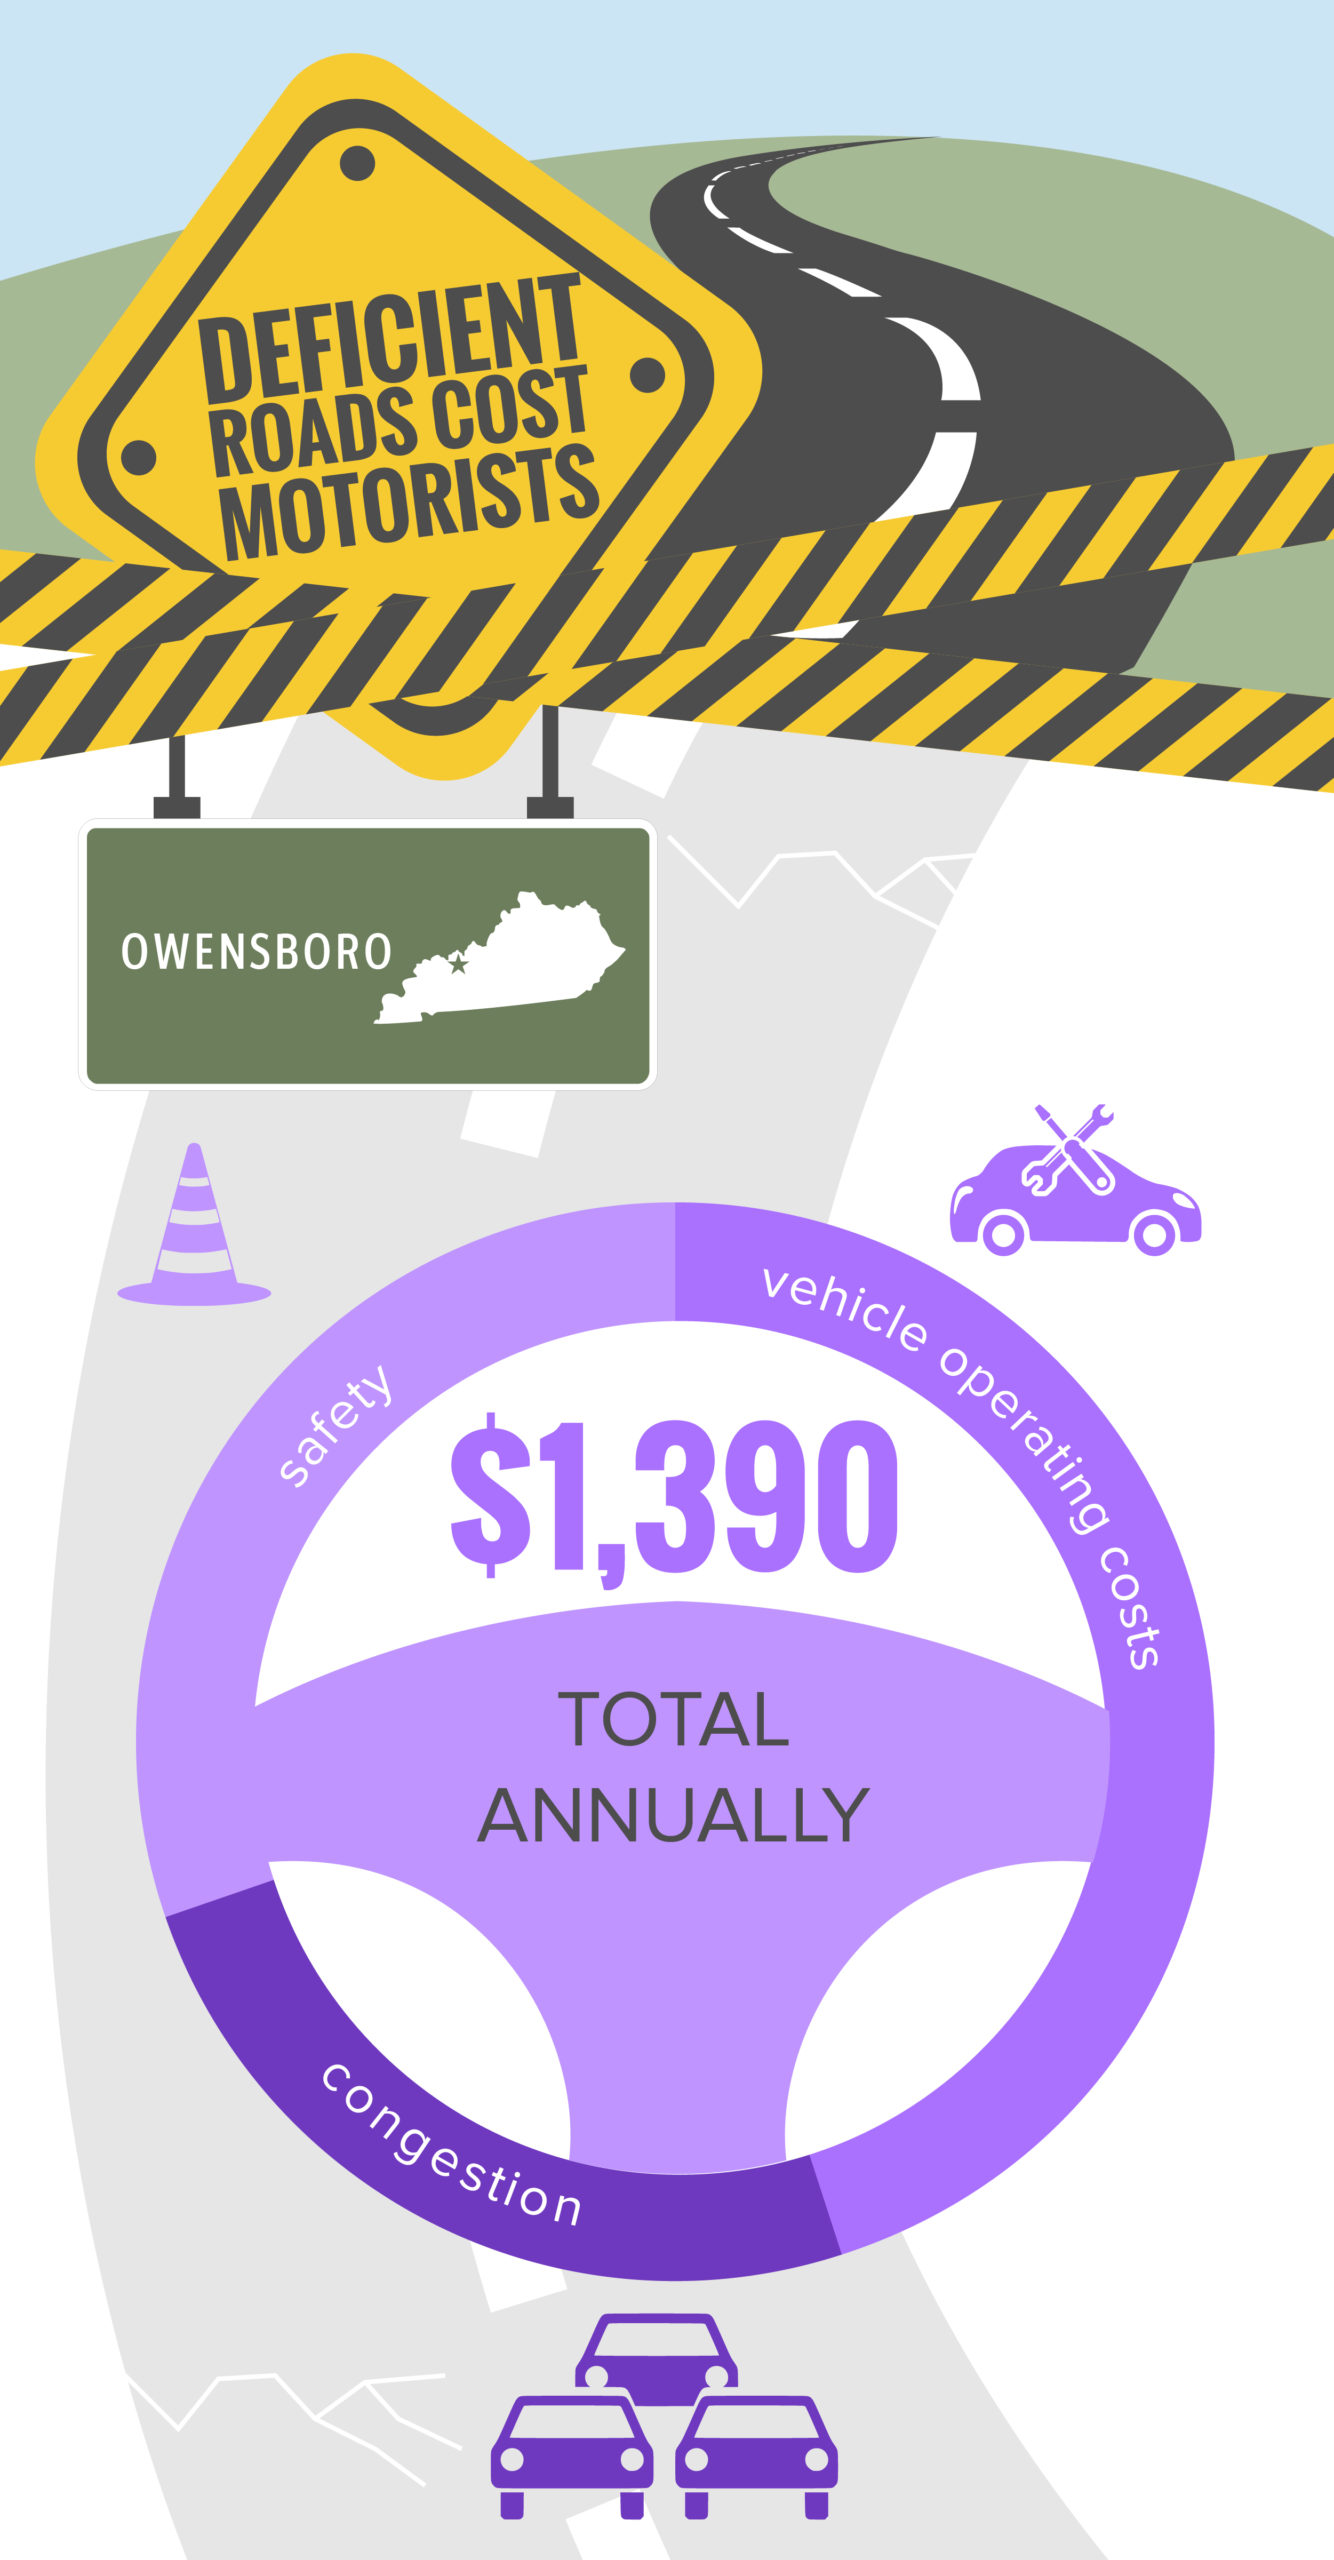 Owensboro Deficient Roads Cost to Motorists Infographic – February 2022